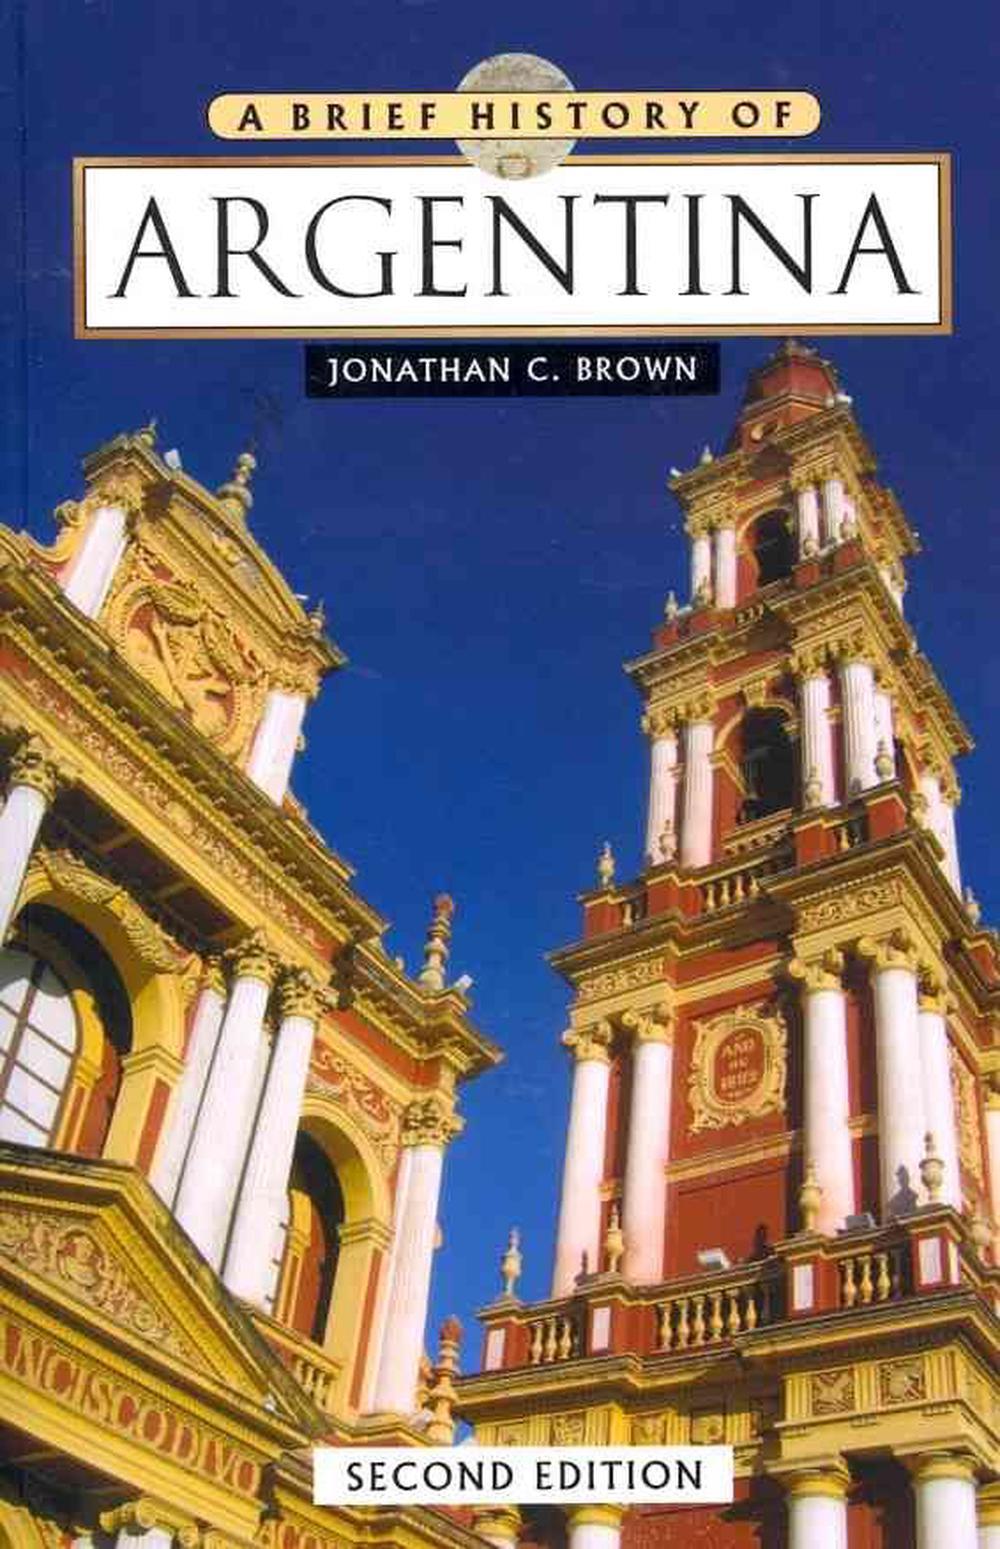 A Brief History of Argentina by Jonathan C. Brown, Paperback